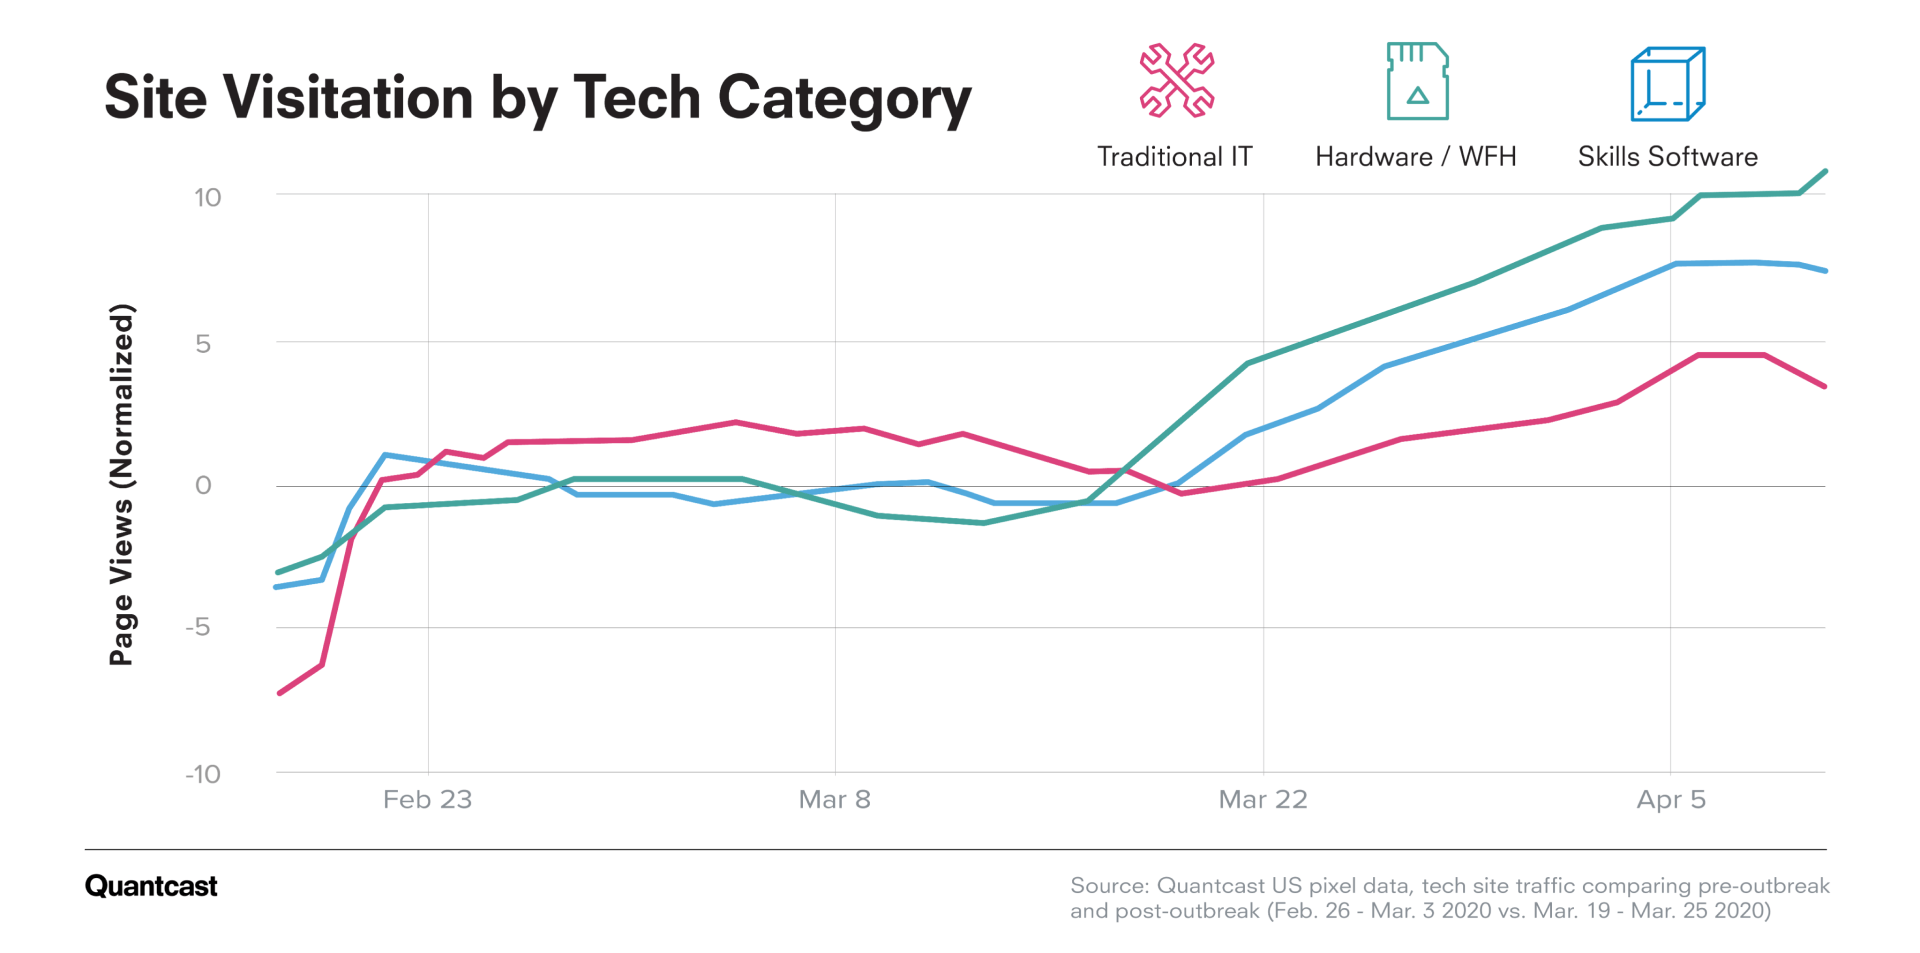 Site visitation by tech category graph